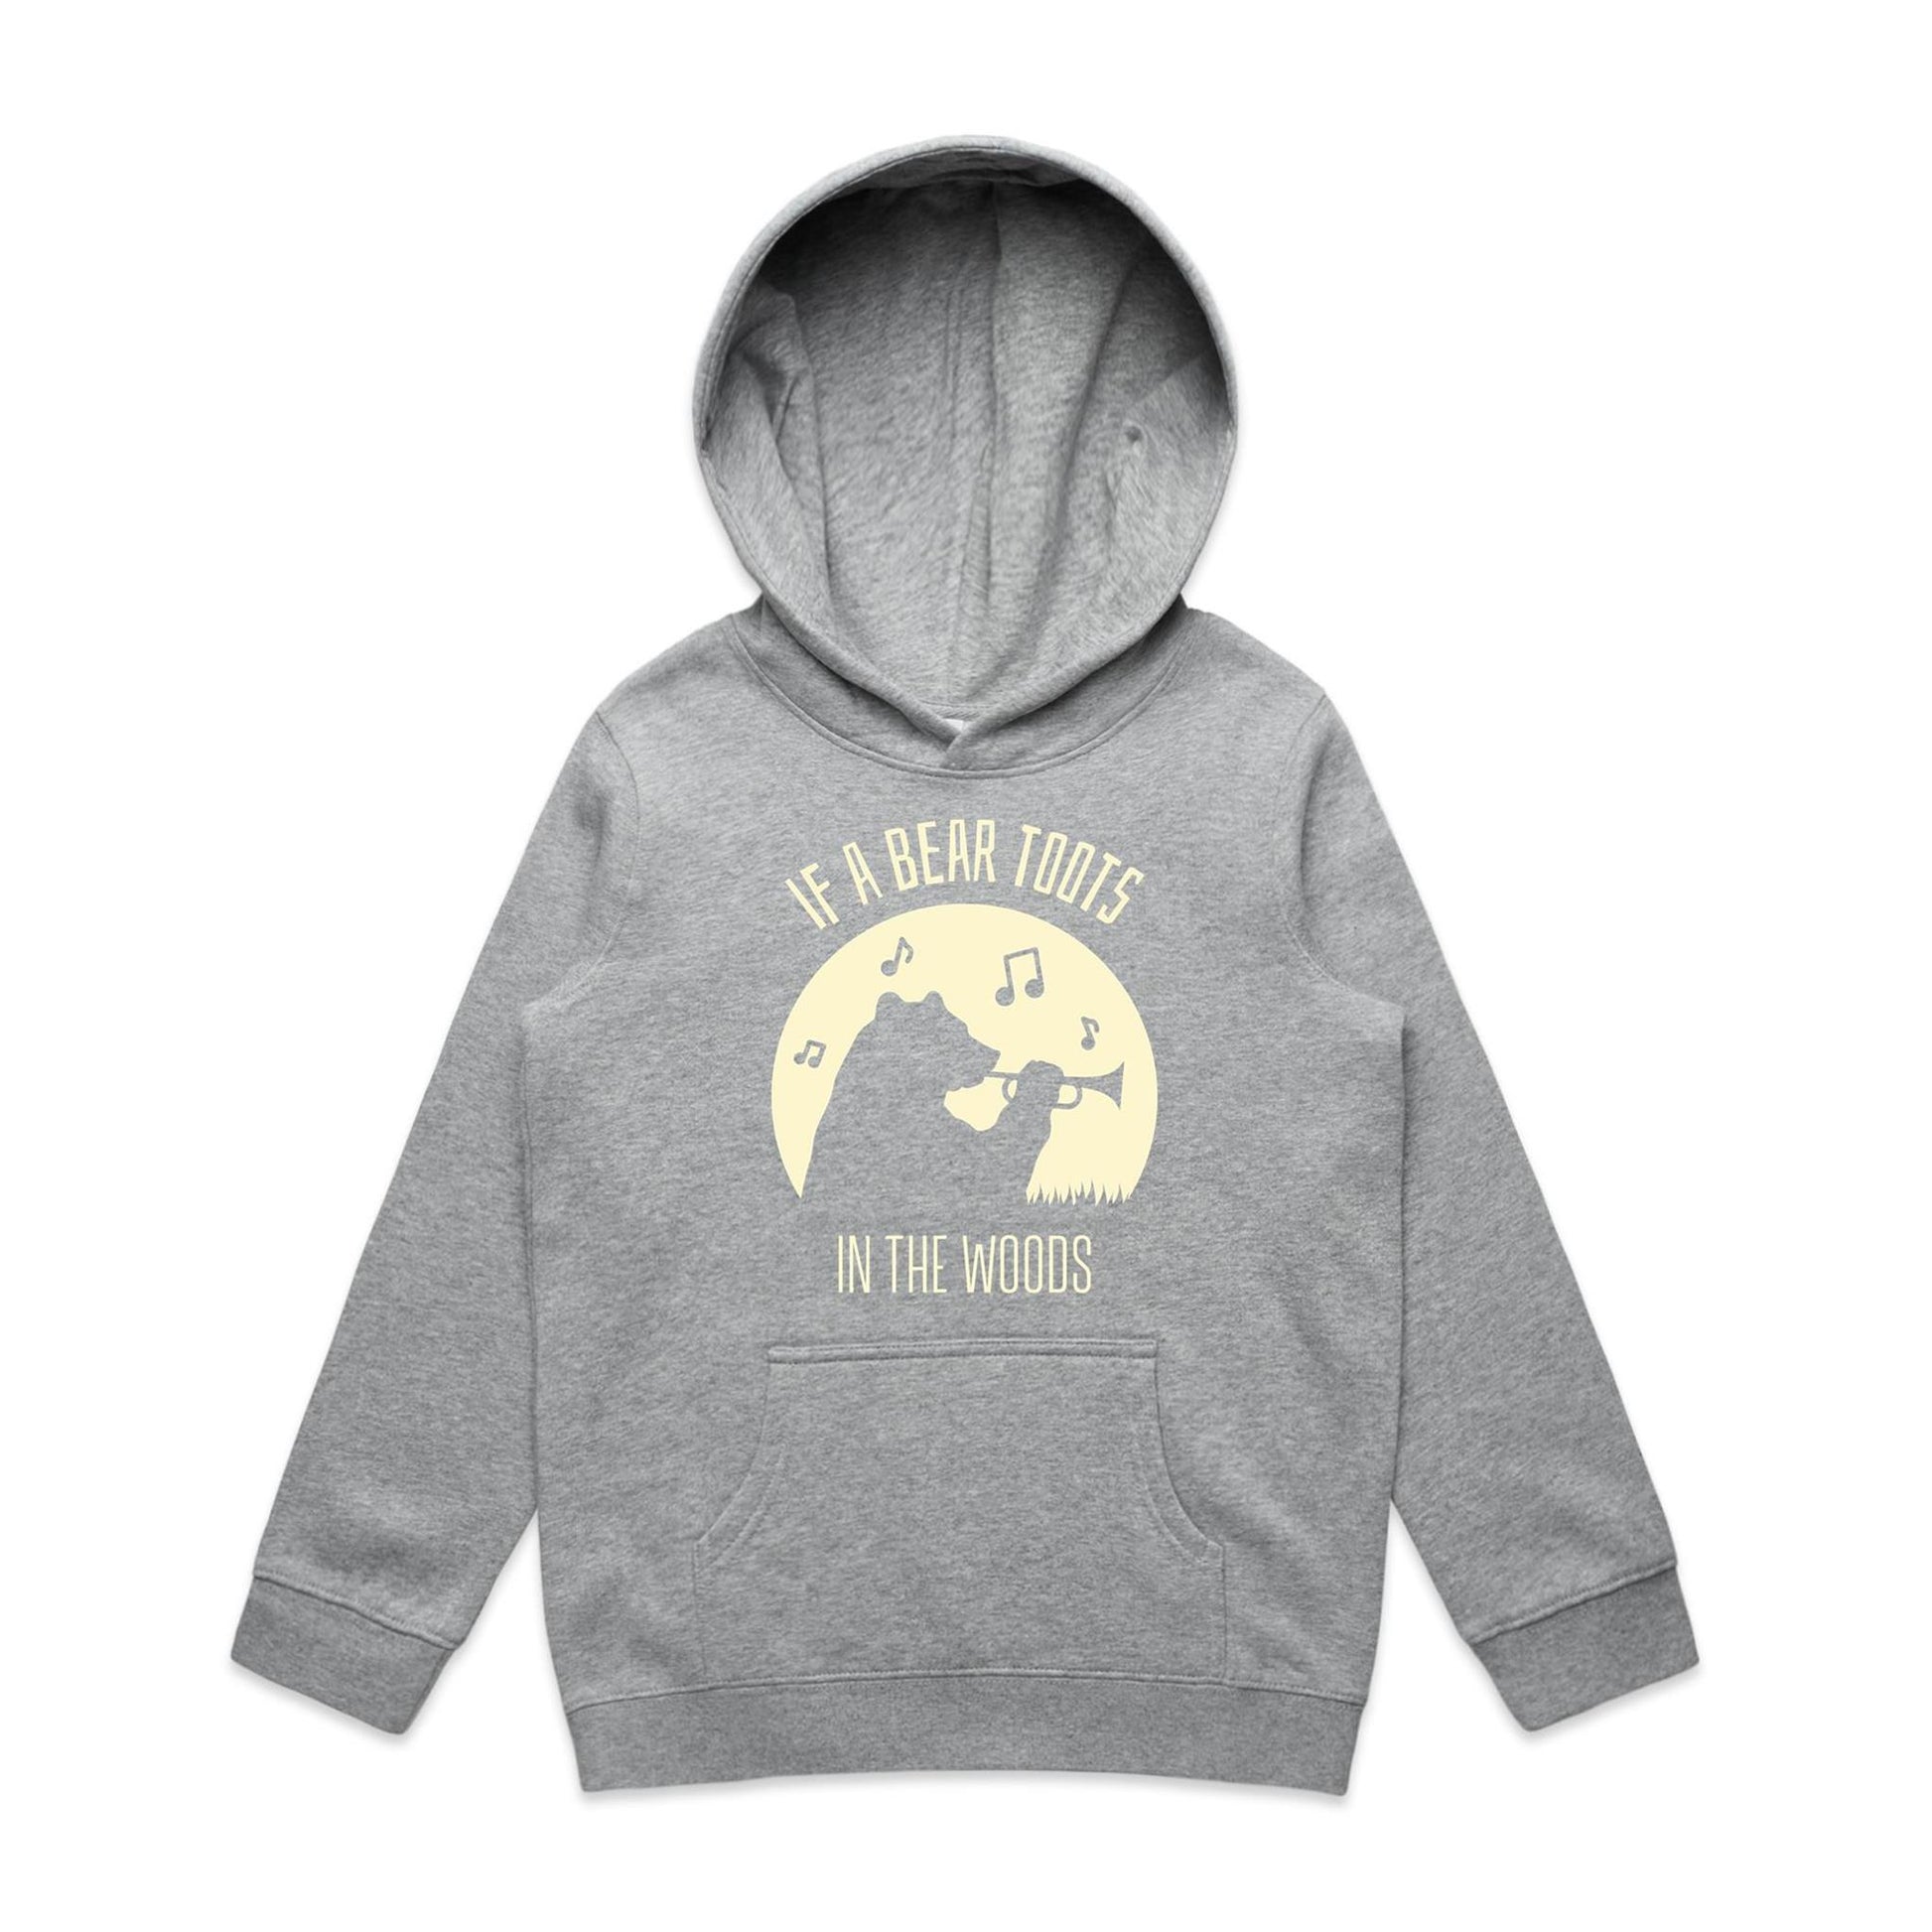 If A Bear Toots In The Woods, Trumpet Player - Youth Supply Hood Grey Marle Kids Hoodie